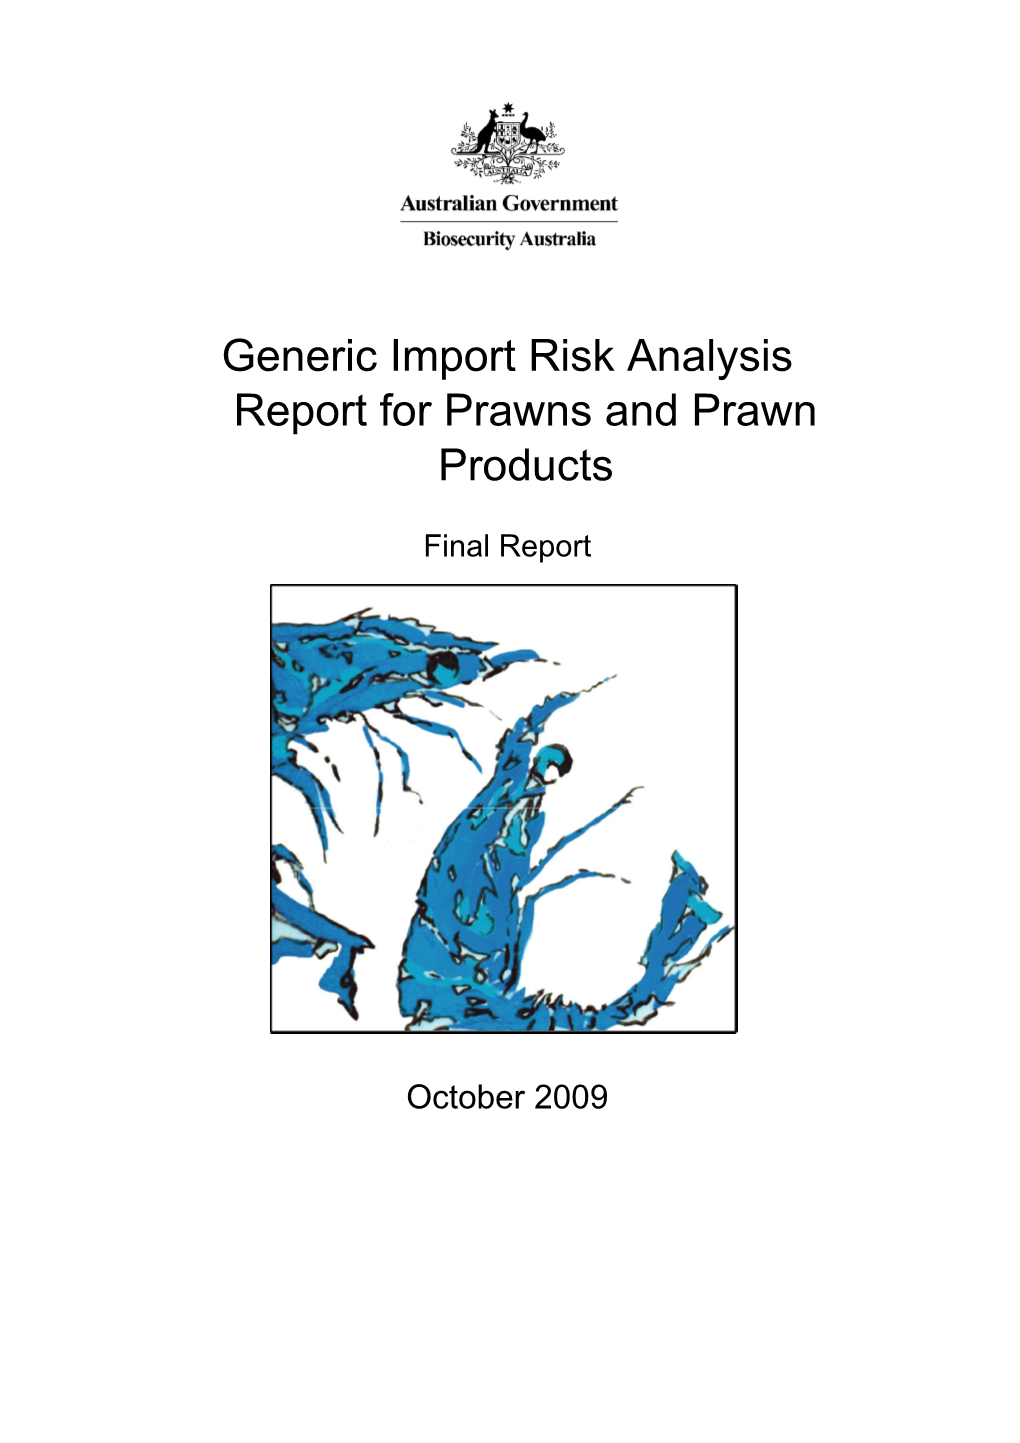 Generic Import Risk Analysis Report For Prawns And Prawn Products